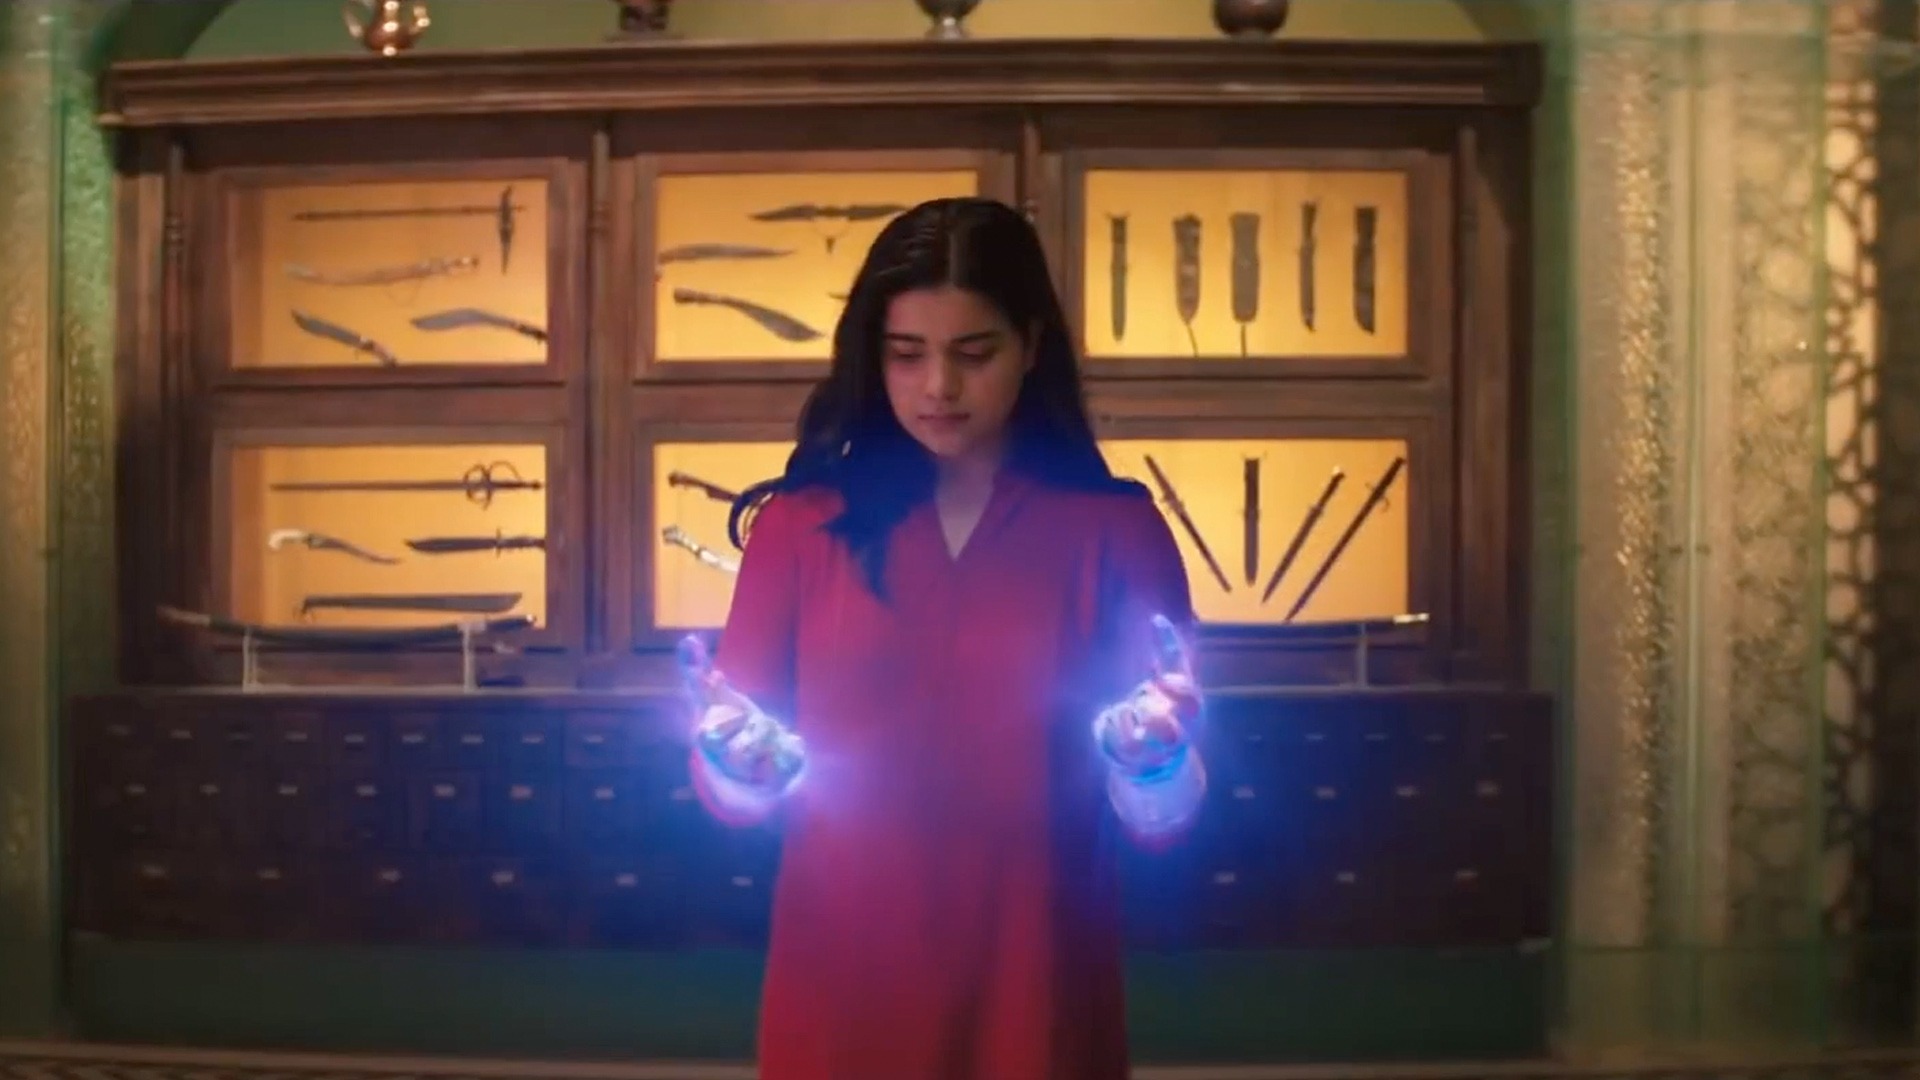 MsMarvel has been officially crowned as Rotten Tomatoes' Best